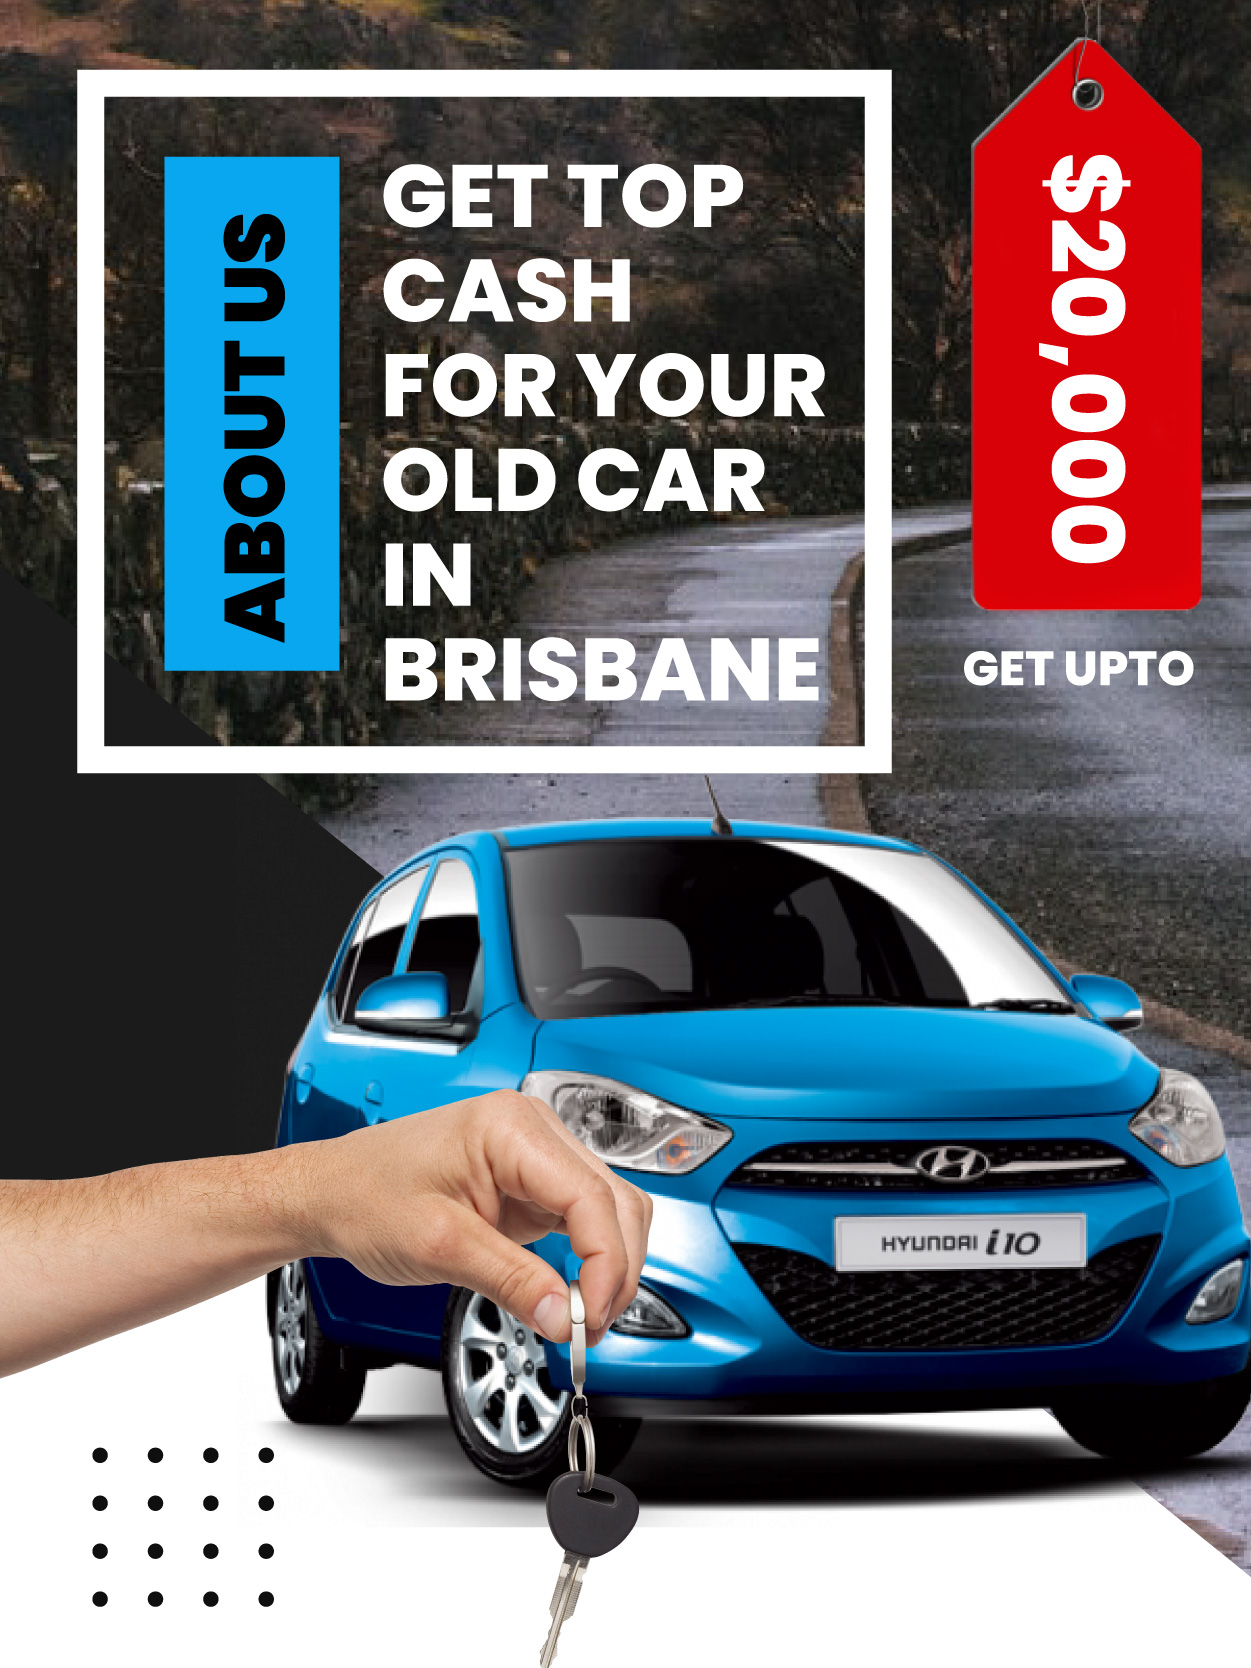 get top cash for your old and unwanted car in brisbane